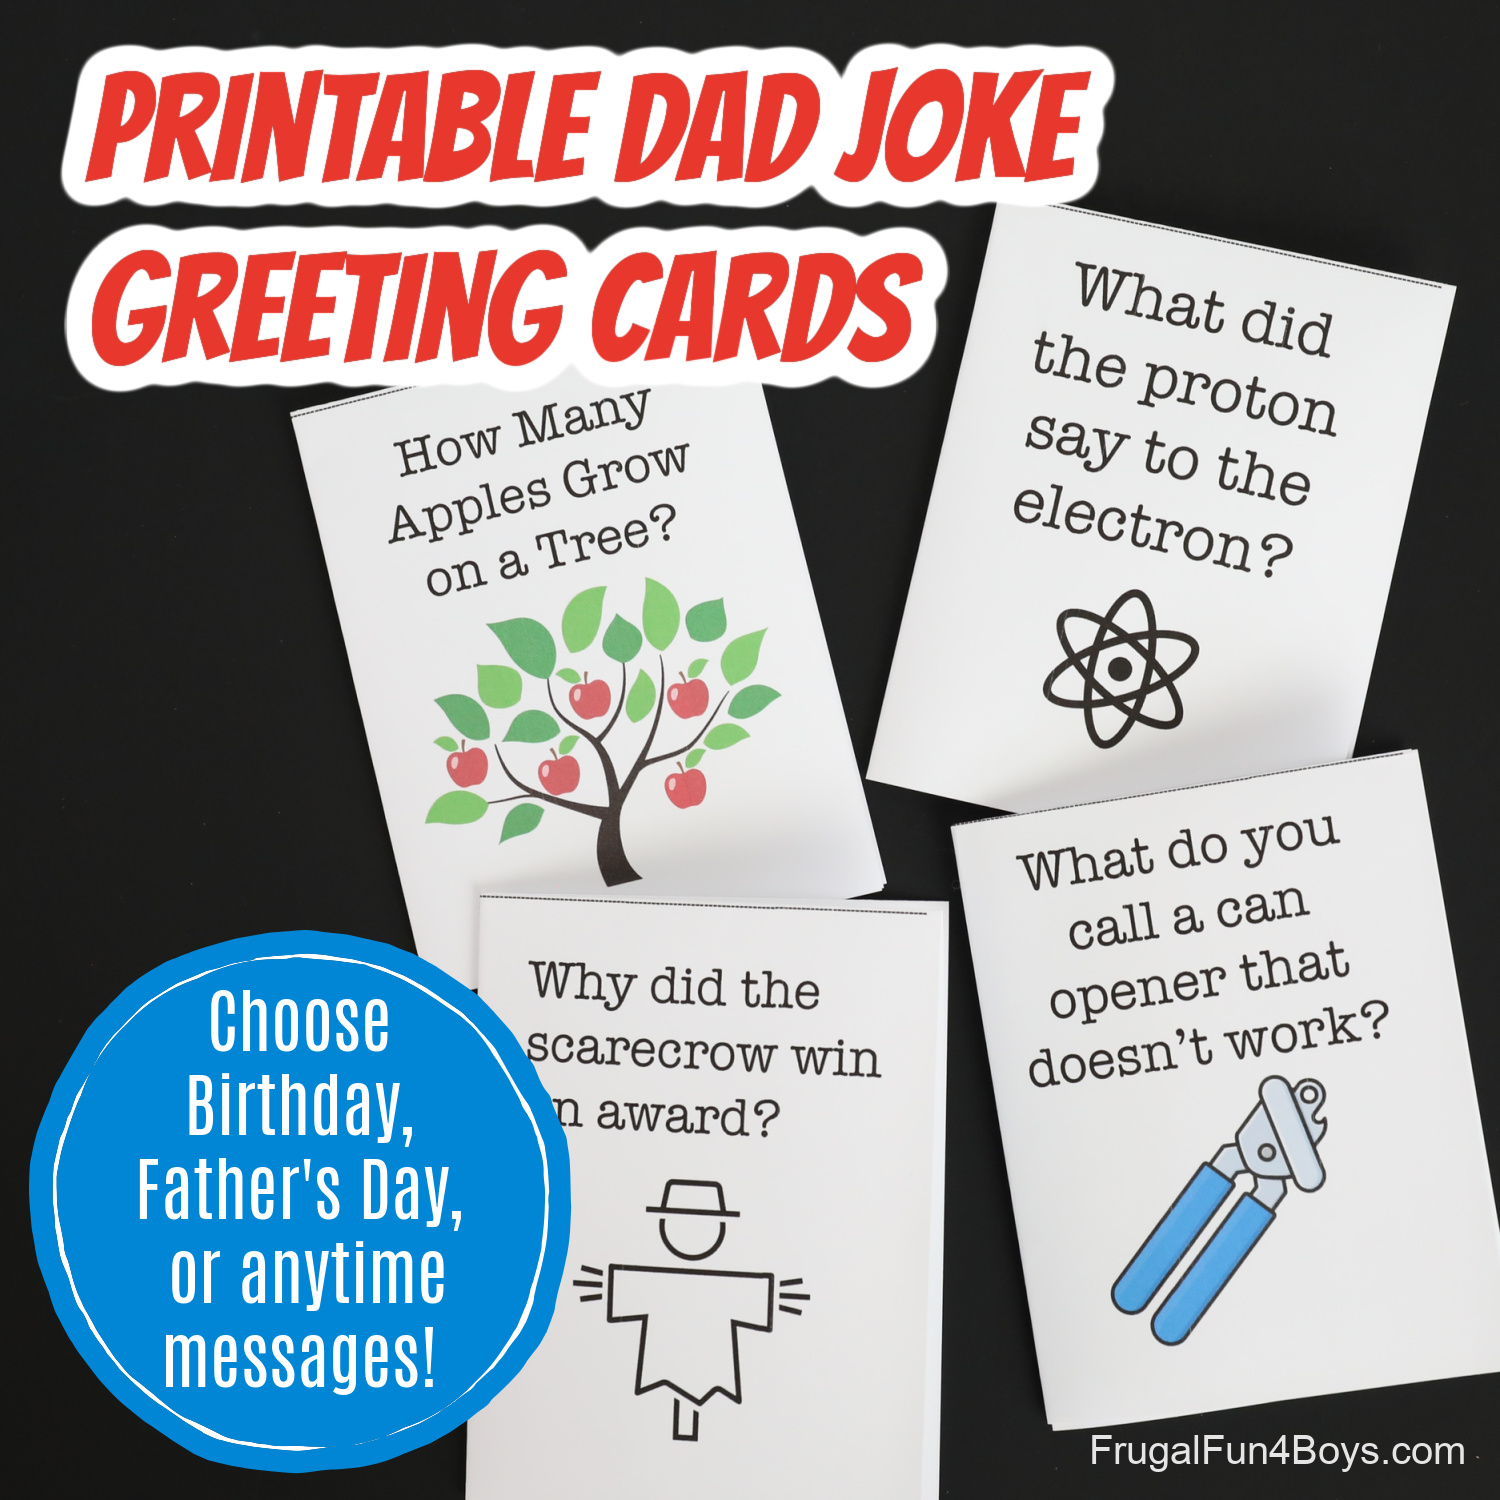 dad joke cards - birthday cards, Father's Day cards